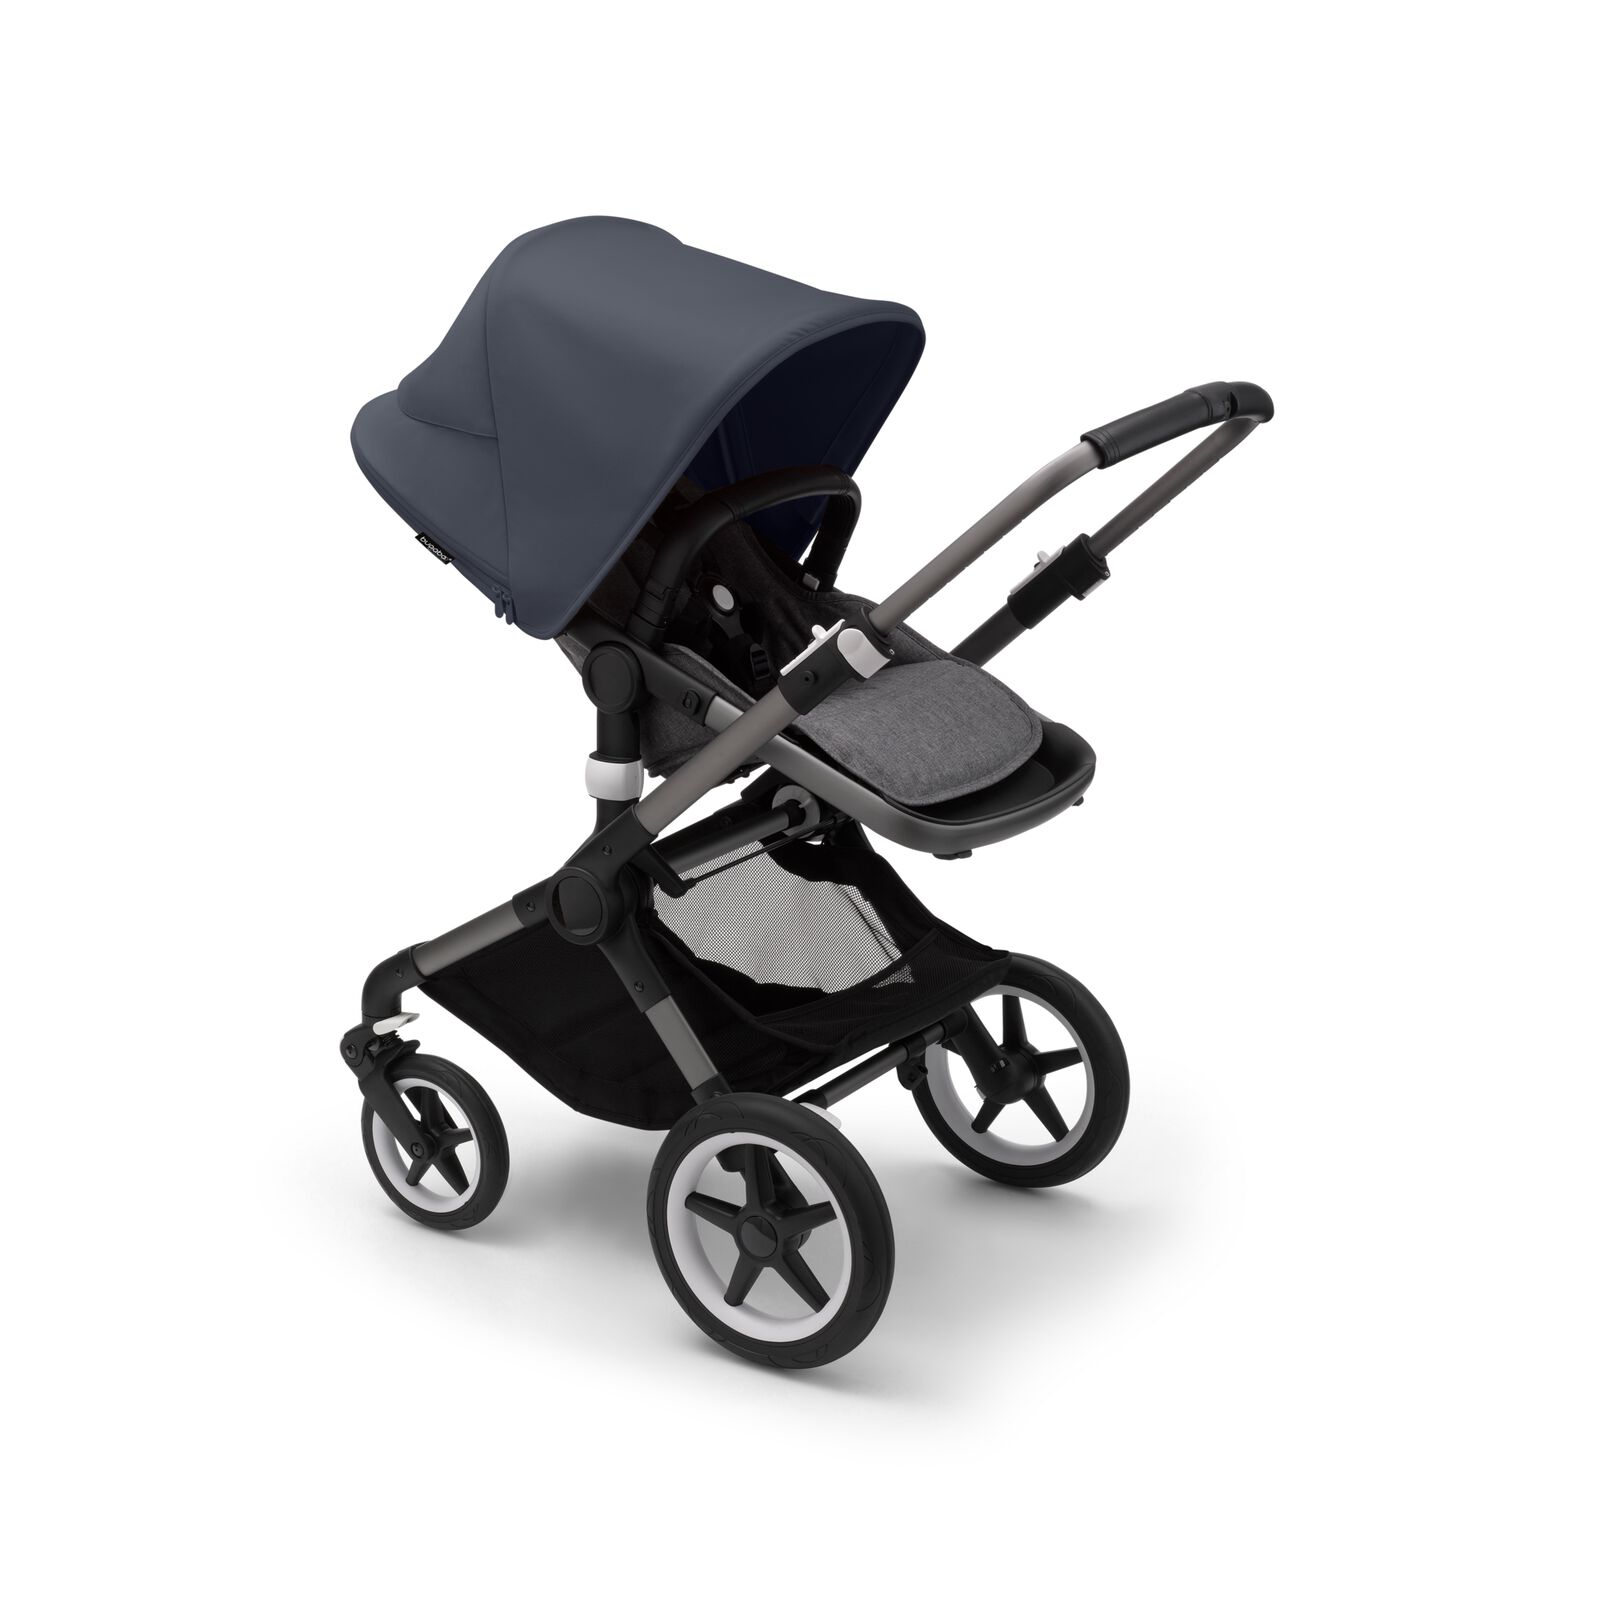 Bugaboo Fox 3 seat stroller with graphite frame, grey fabrics, and stormy blue sun canopy.